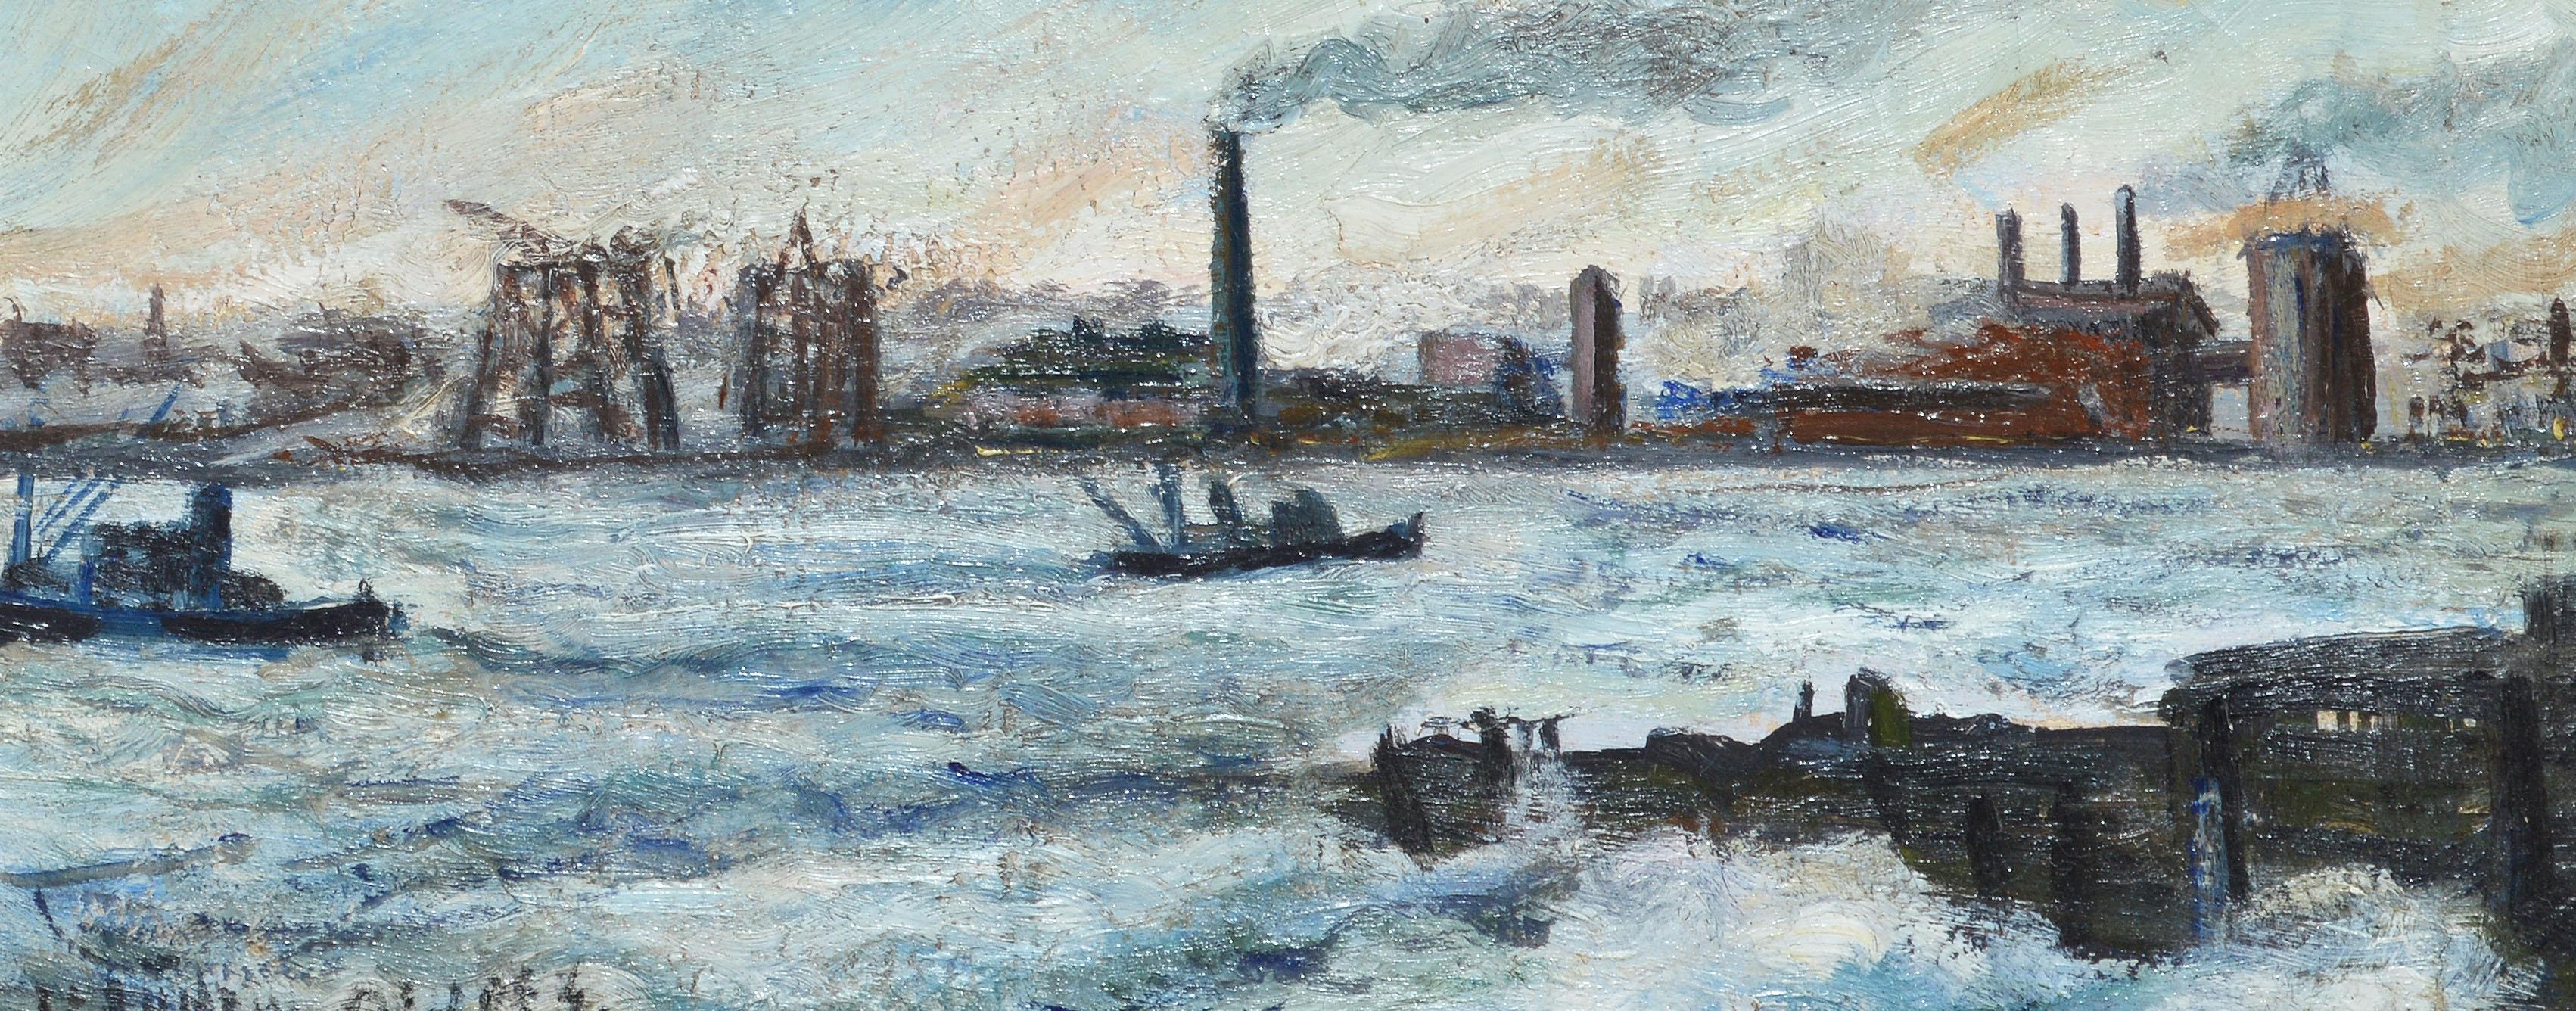 Antique Ashcan School Modernist Oil Painting of an Industrial Harbor in Winter 1